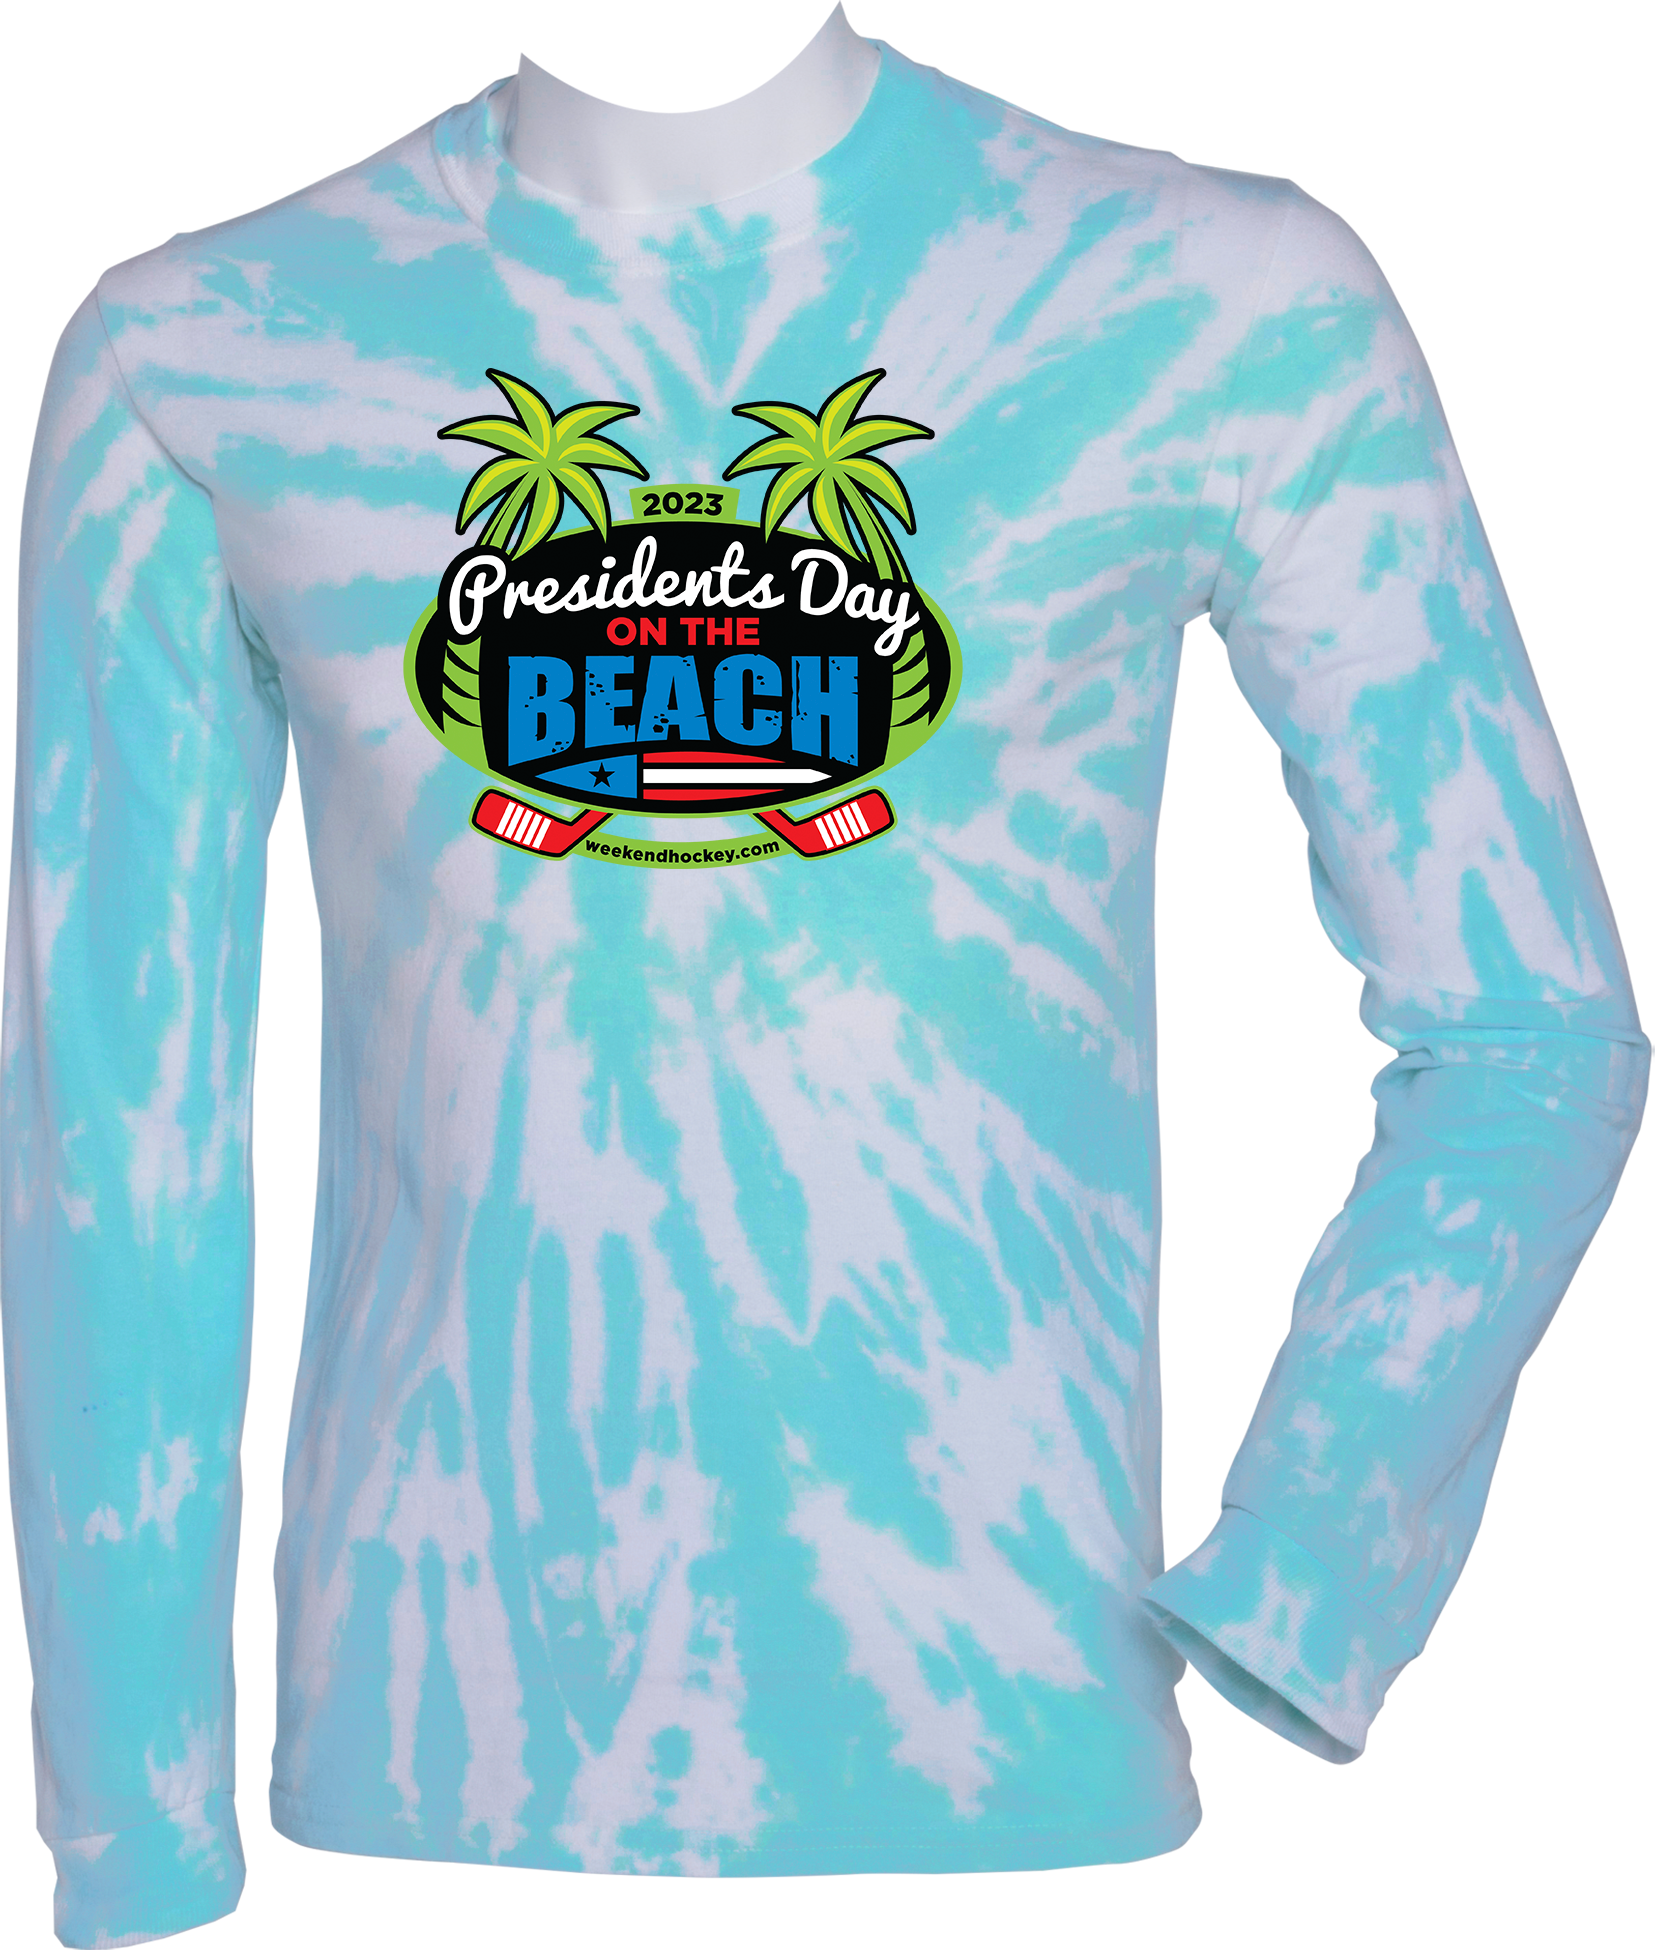 TIE-DYE LONG SLEEVES - 2023 Presidents Day on the Beach